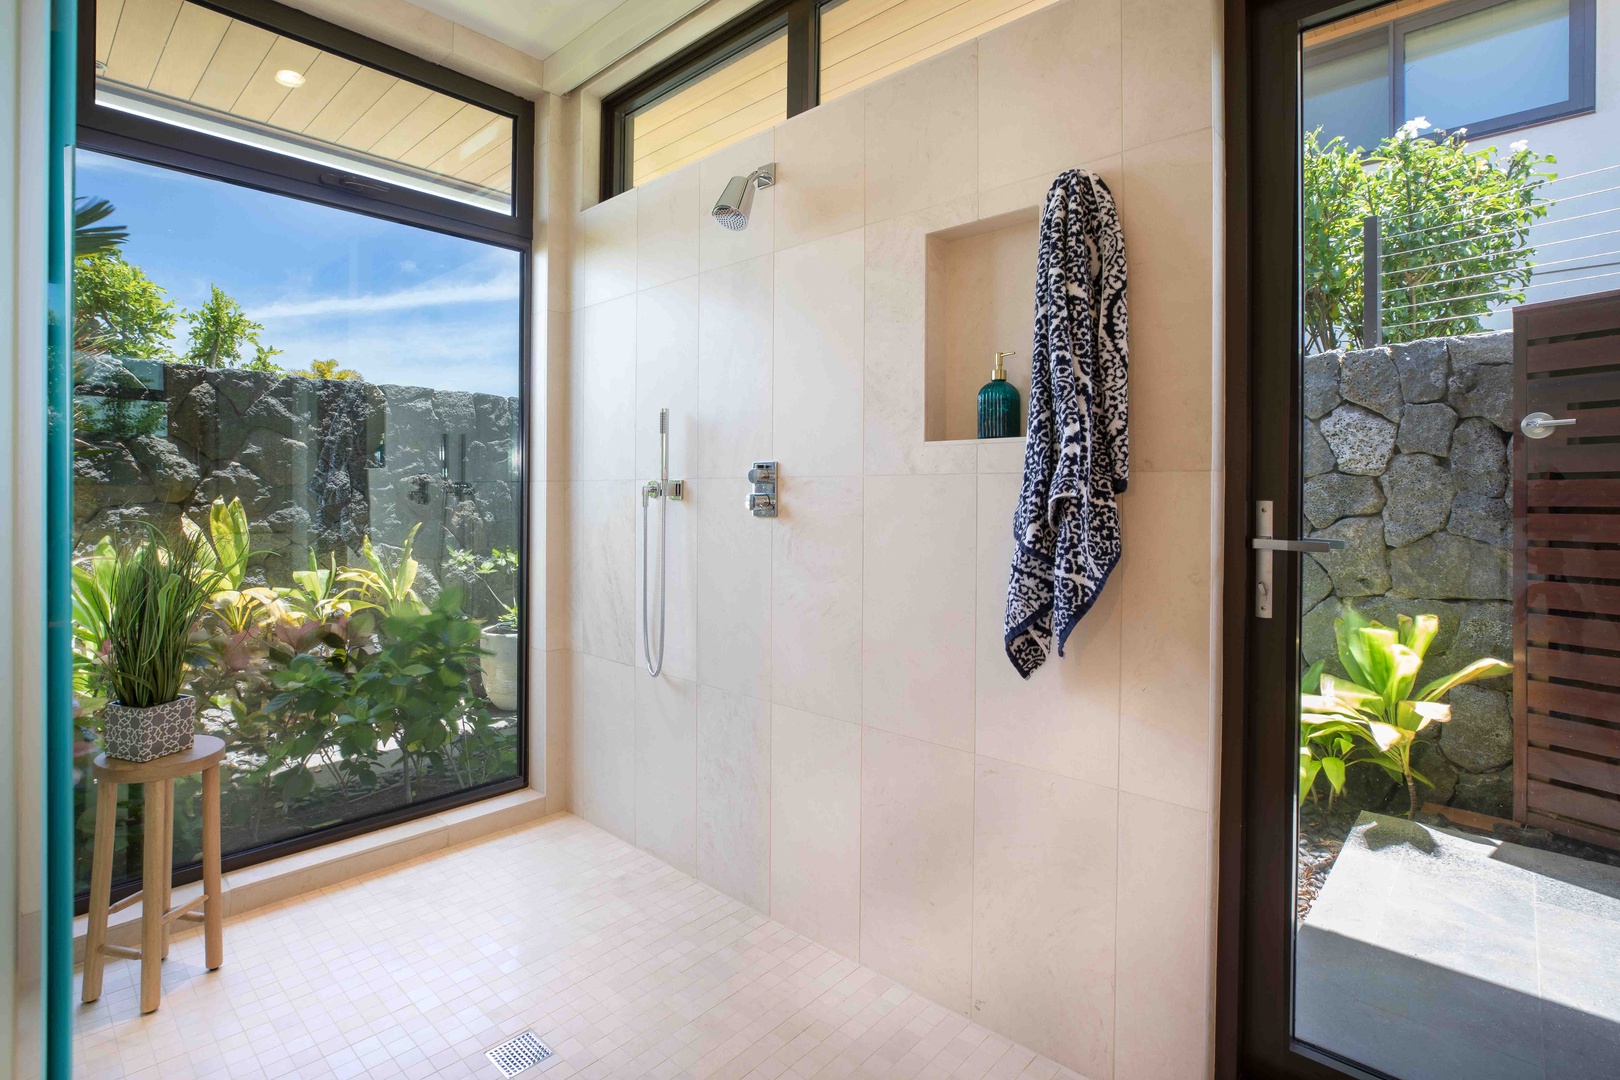 Kamuela Vacation Rentals, Hapuna Estates #8 - The shower in Primary Suite 2 gives you plenty of room to enjoy